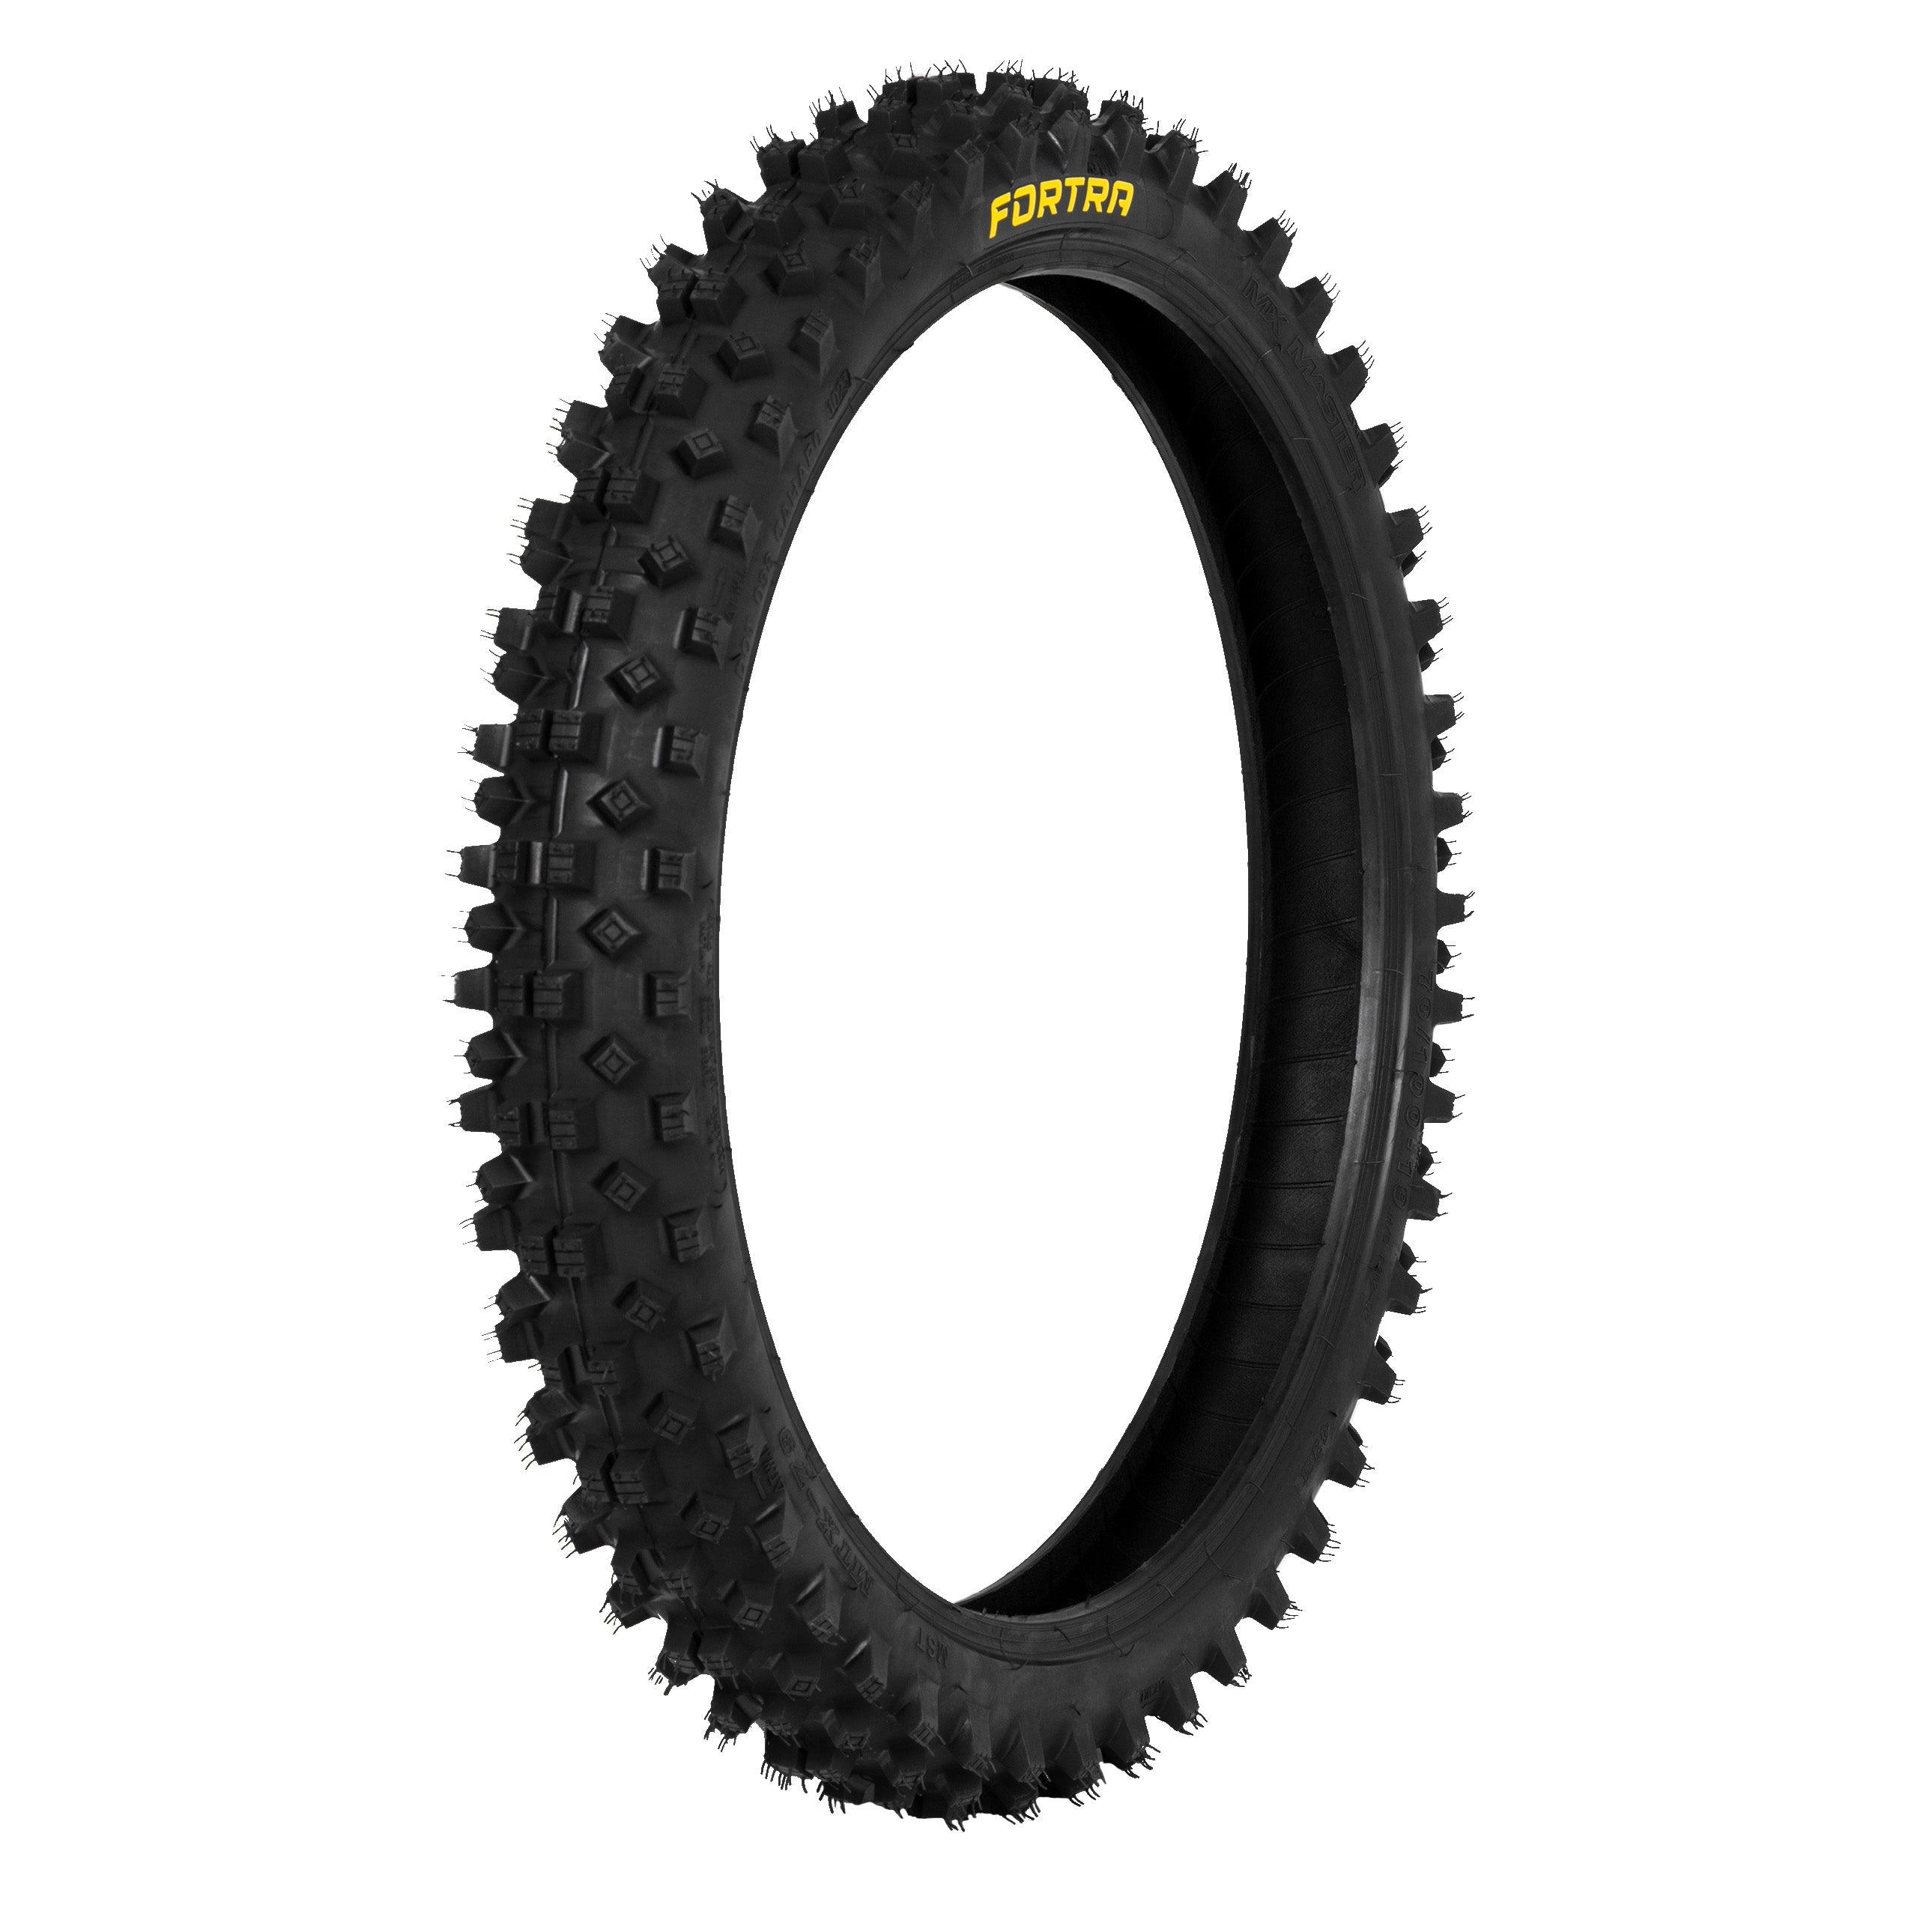 FORTRA MX14 70/100-19 Tyre